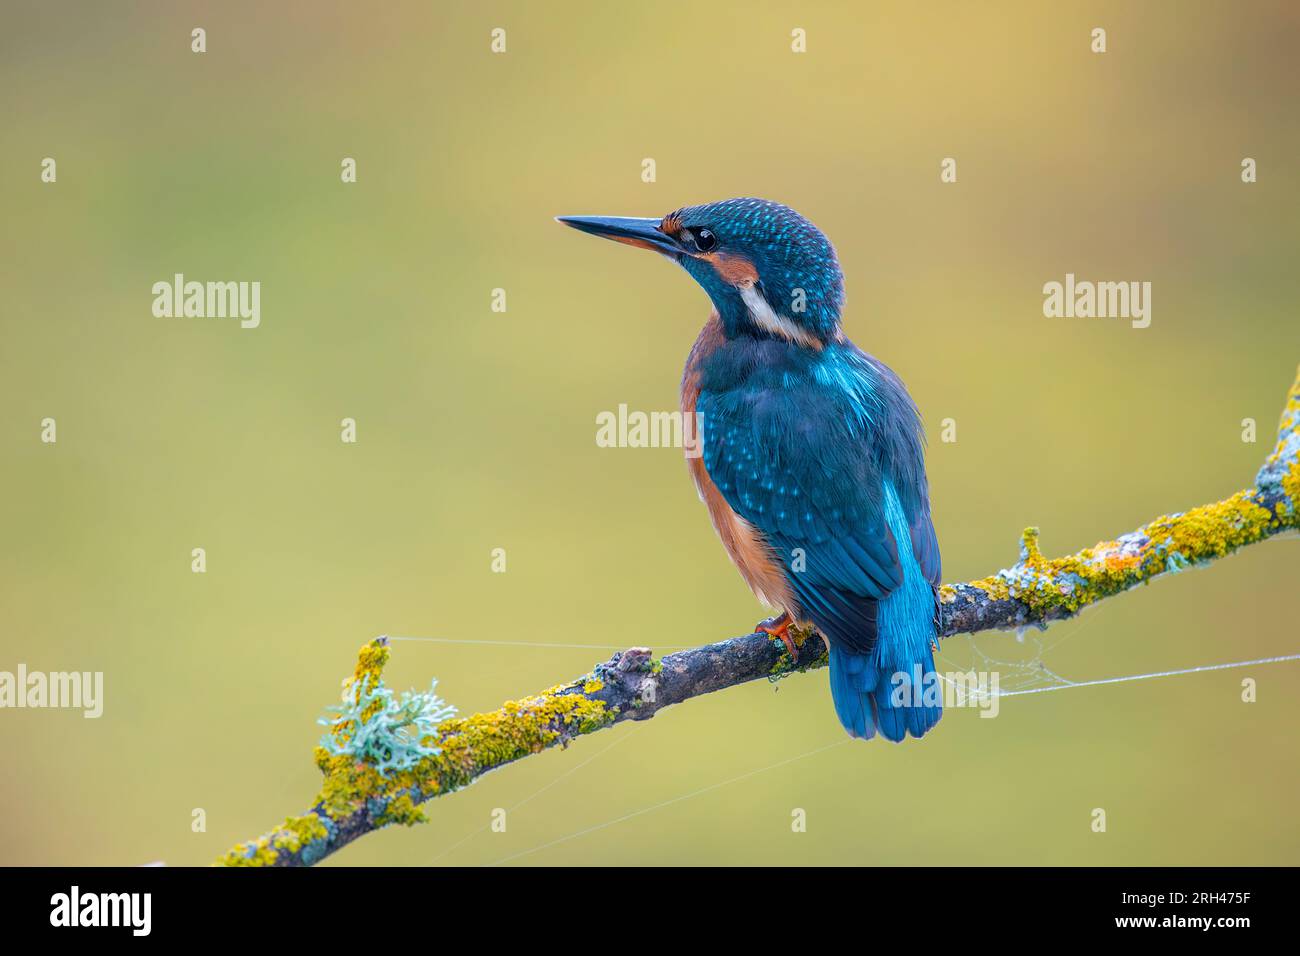 Kingfisher on a branch with warm and background Stock Photo